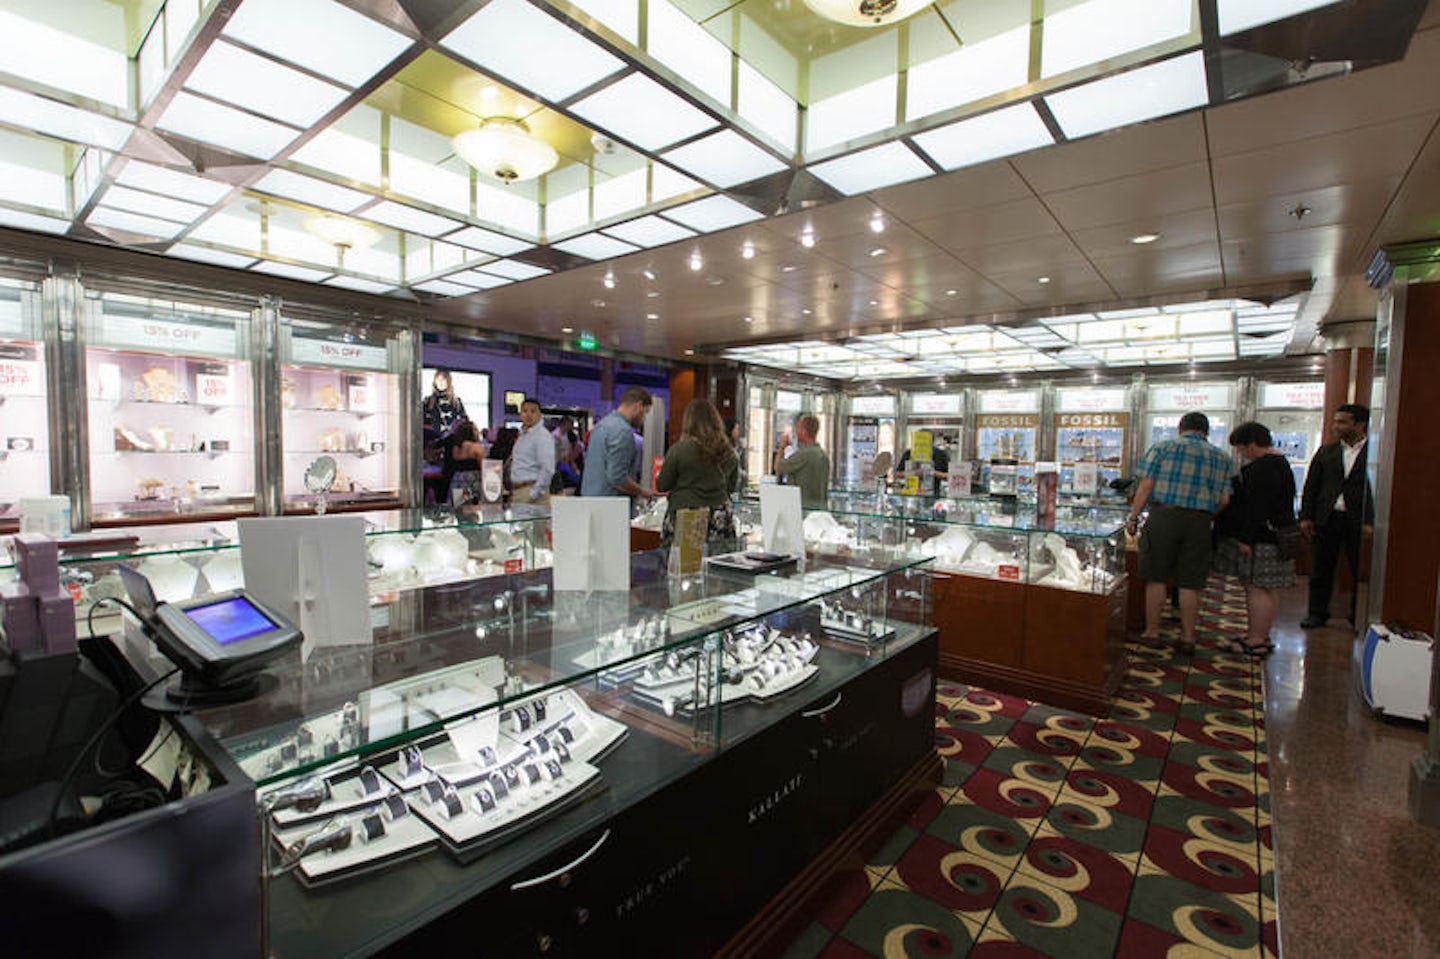 Gifts & Jewelry on Independence of the Seas